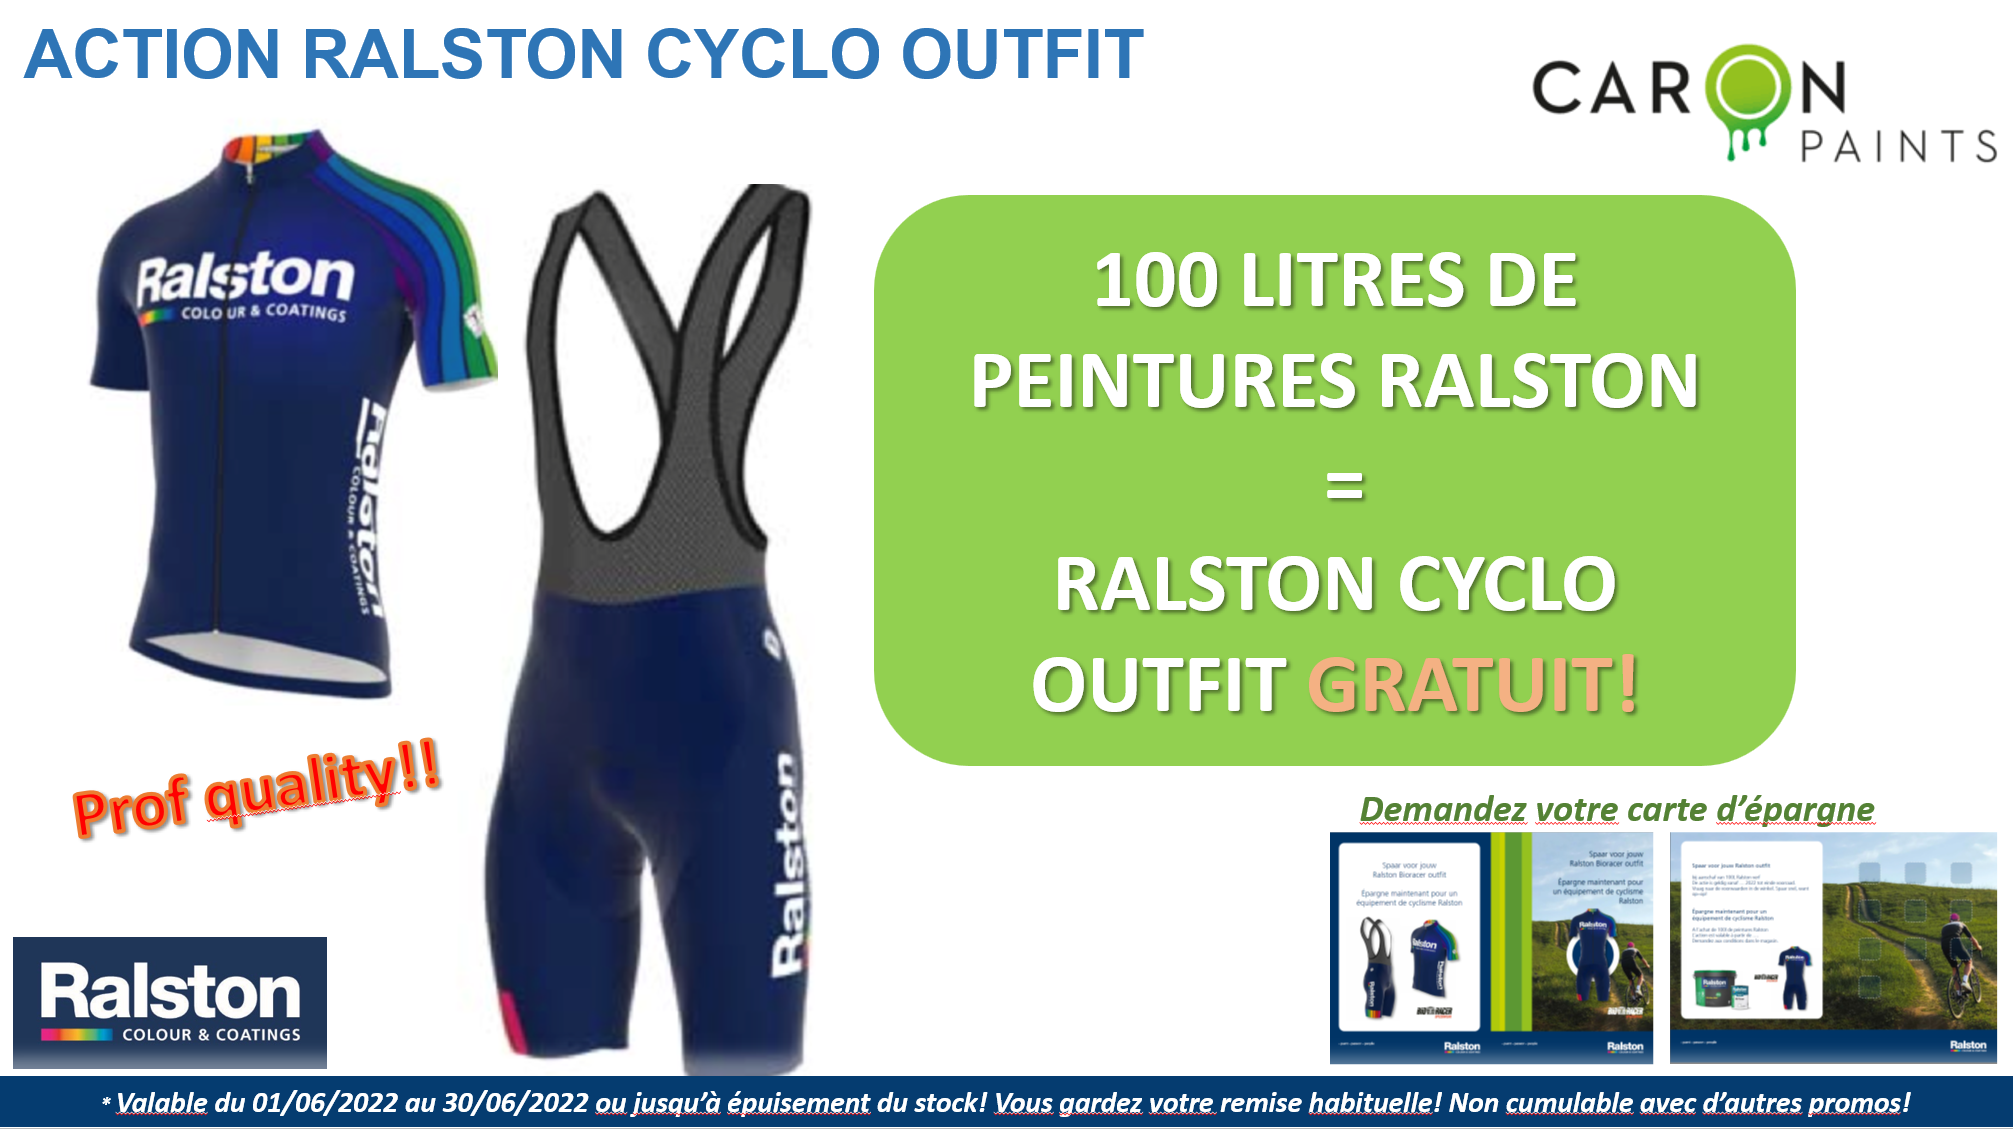 Ralston cyclo outfit